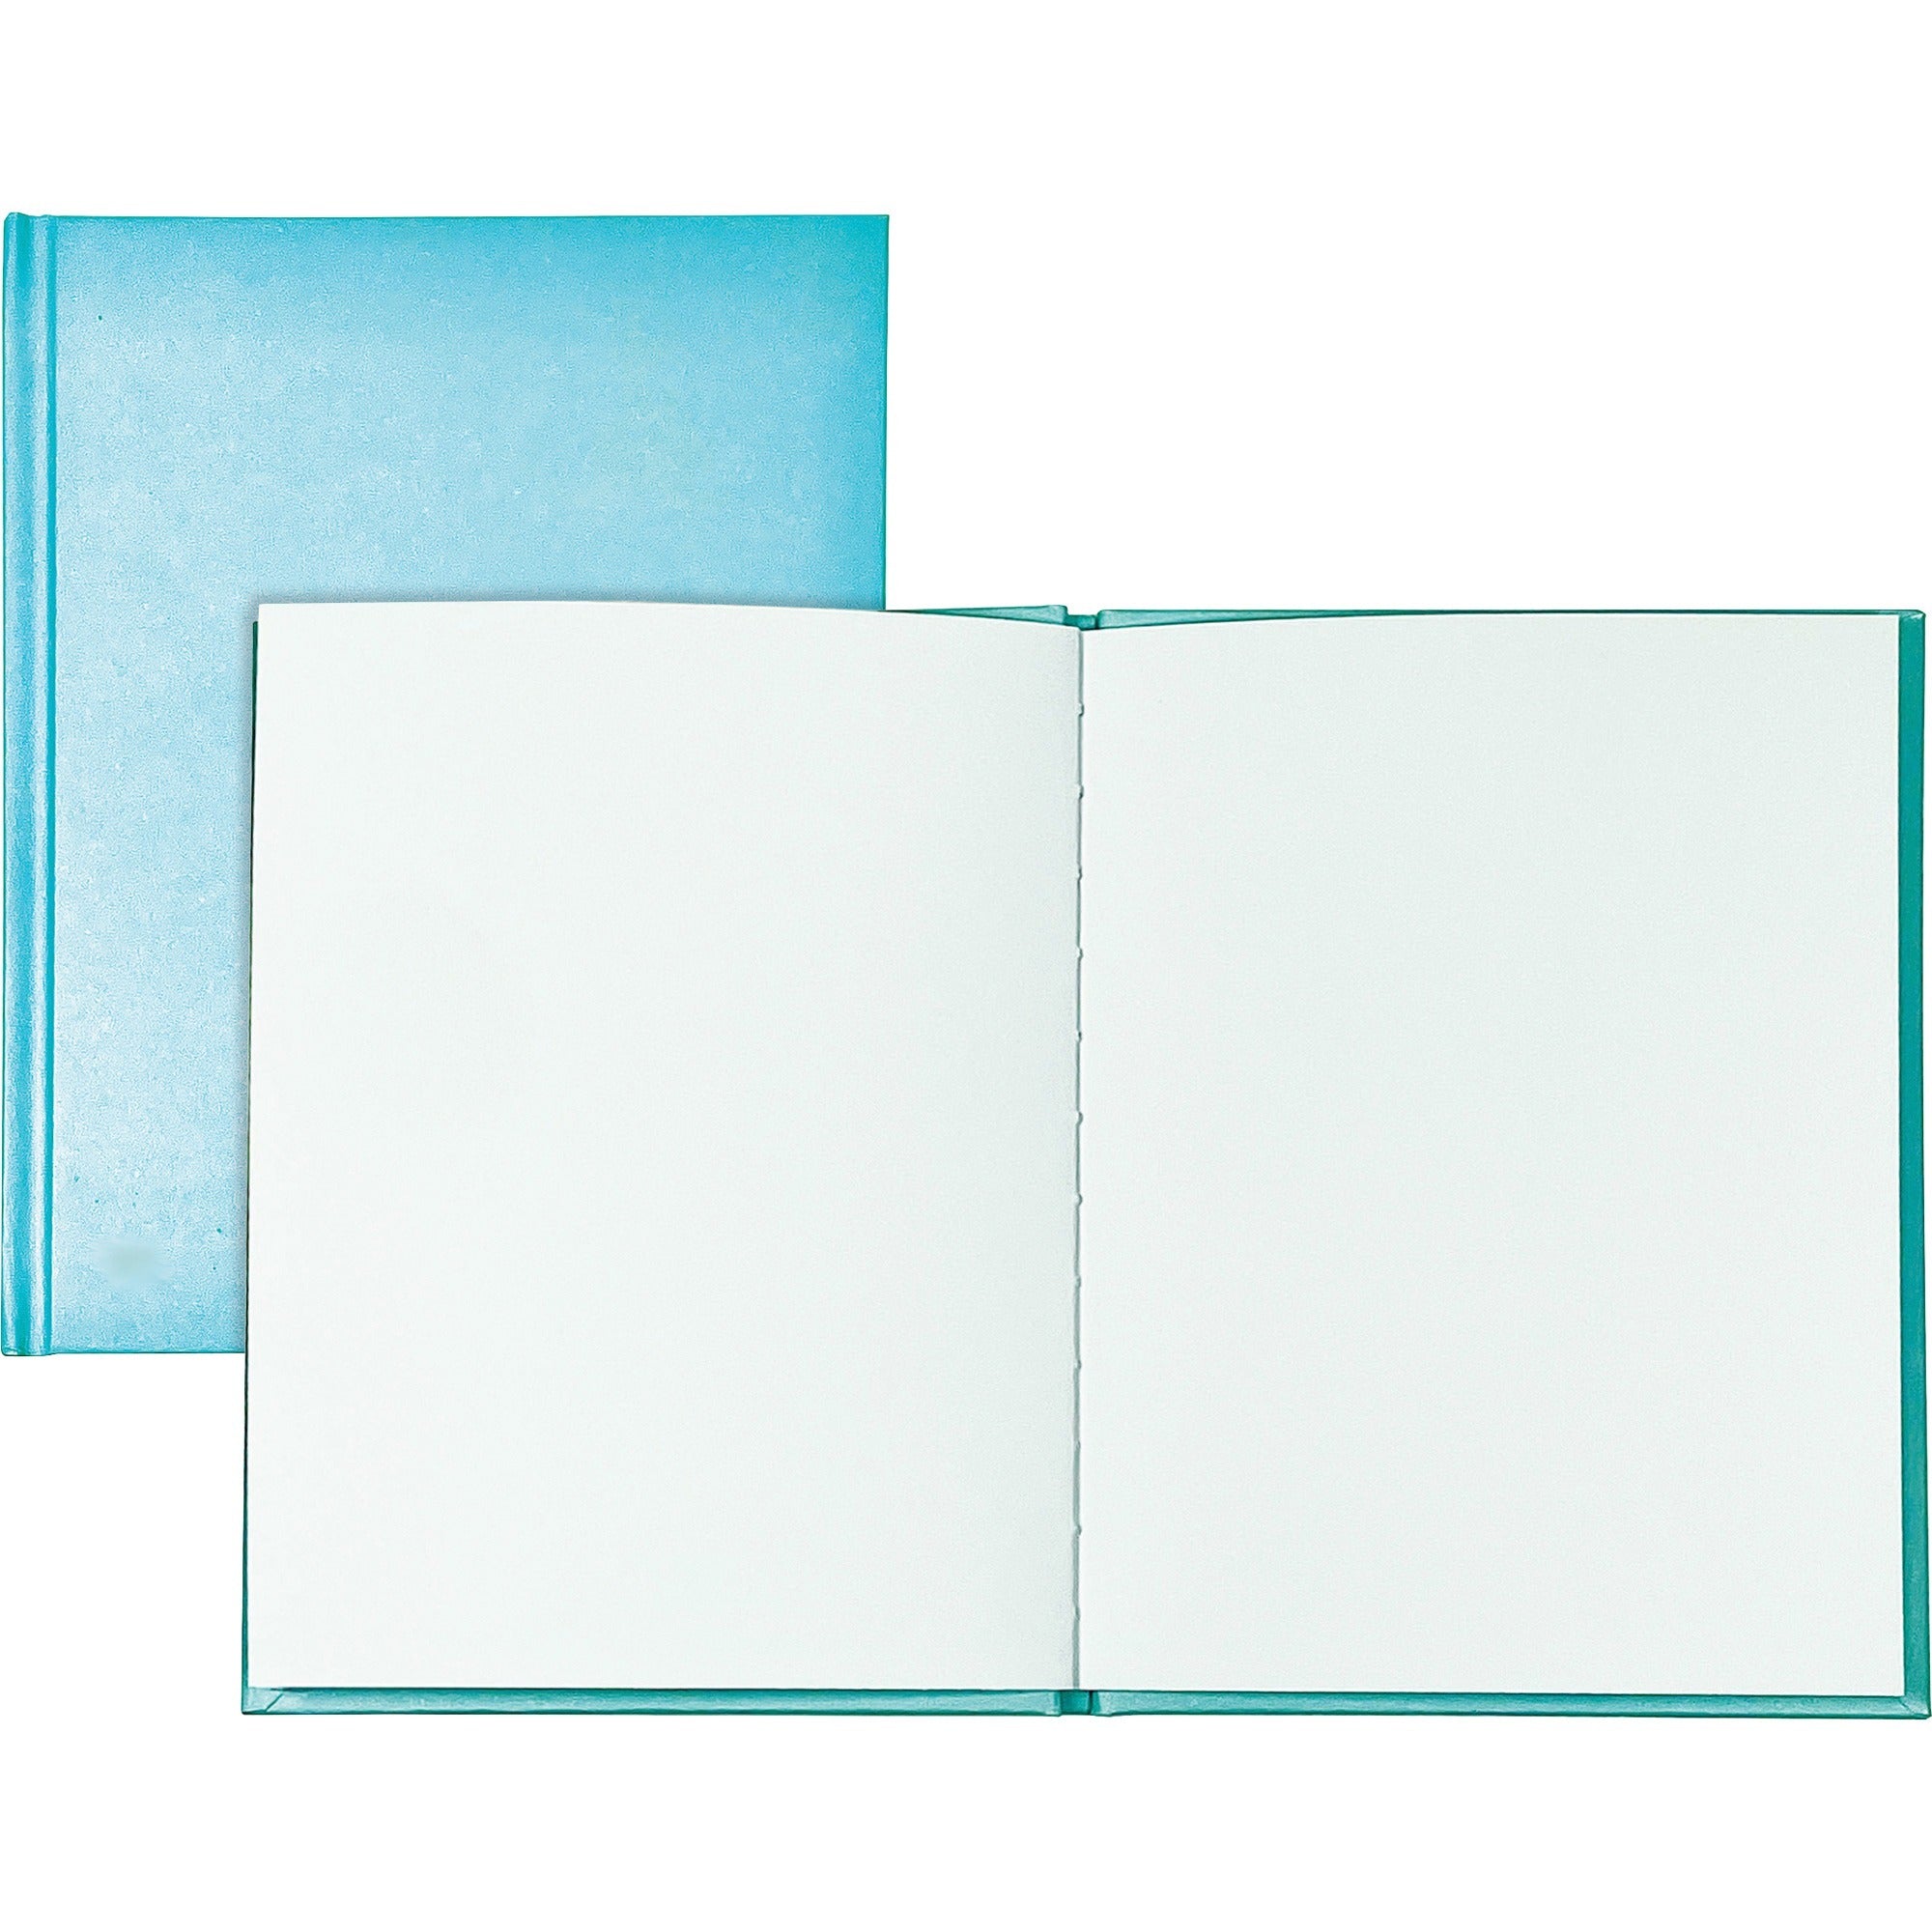 ashley-hardcover-blank-book-28-pages-6-x-8-blue-cover-hard-cover-durable-1-each_ash10714 - 1